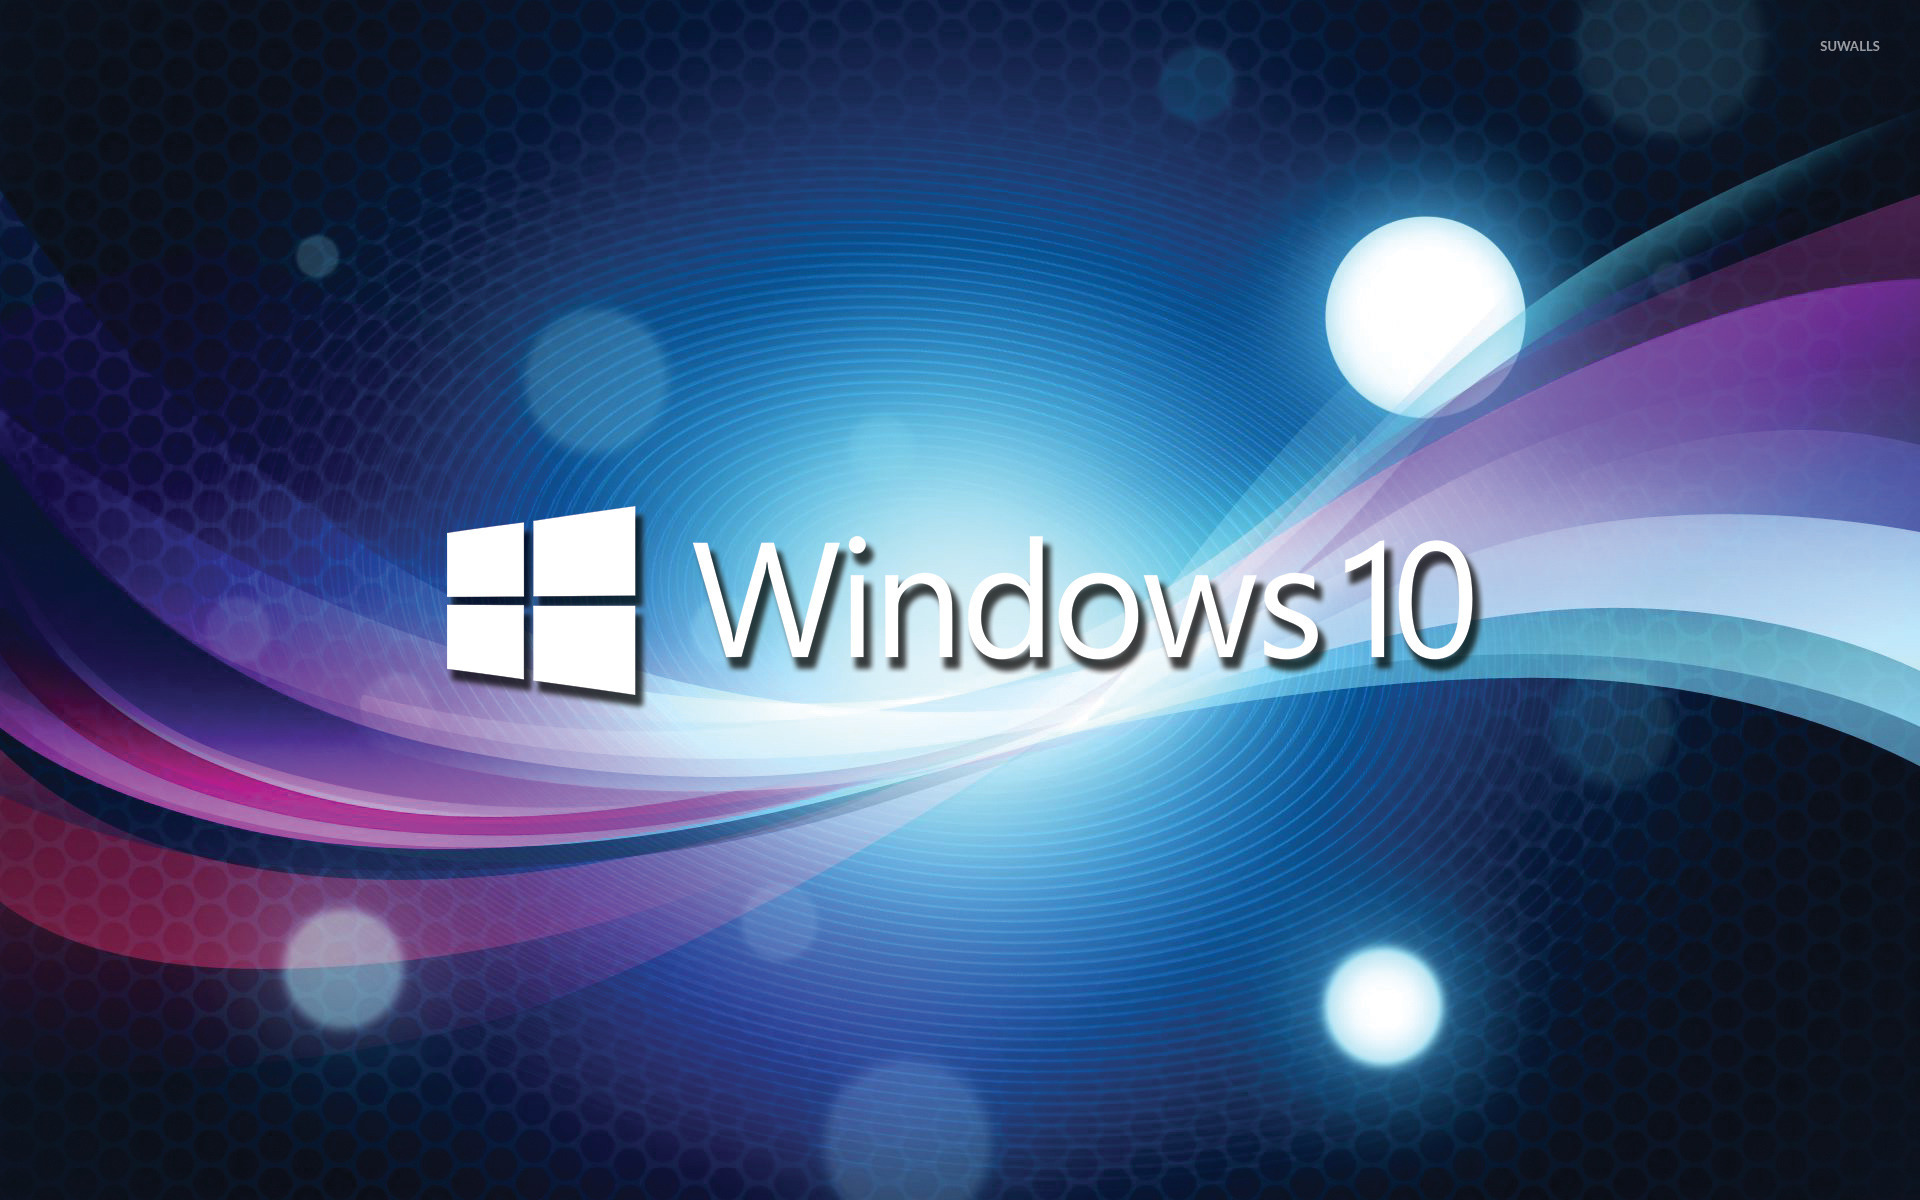 Windows 10 white text logo over the blue cuves wallpaper   Computer